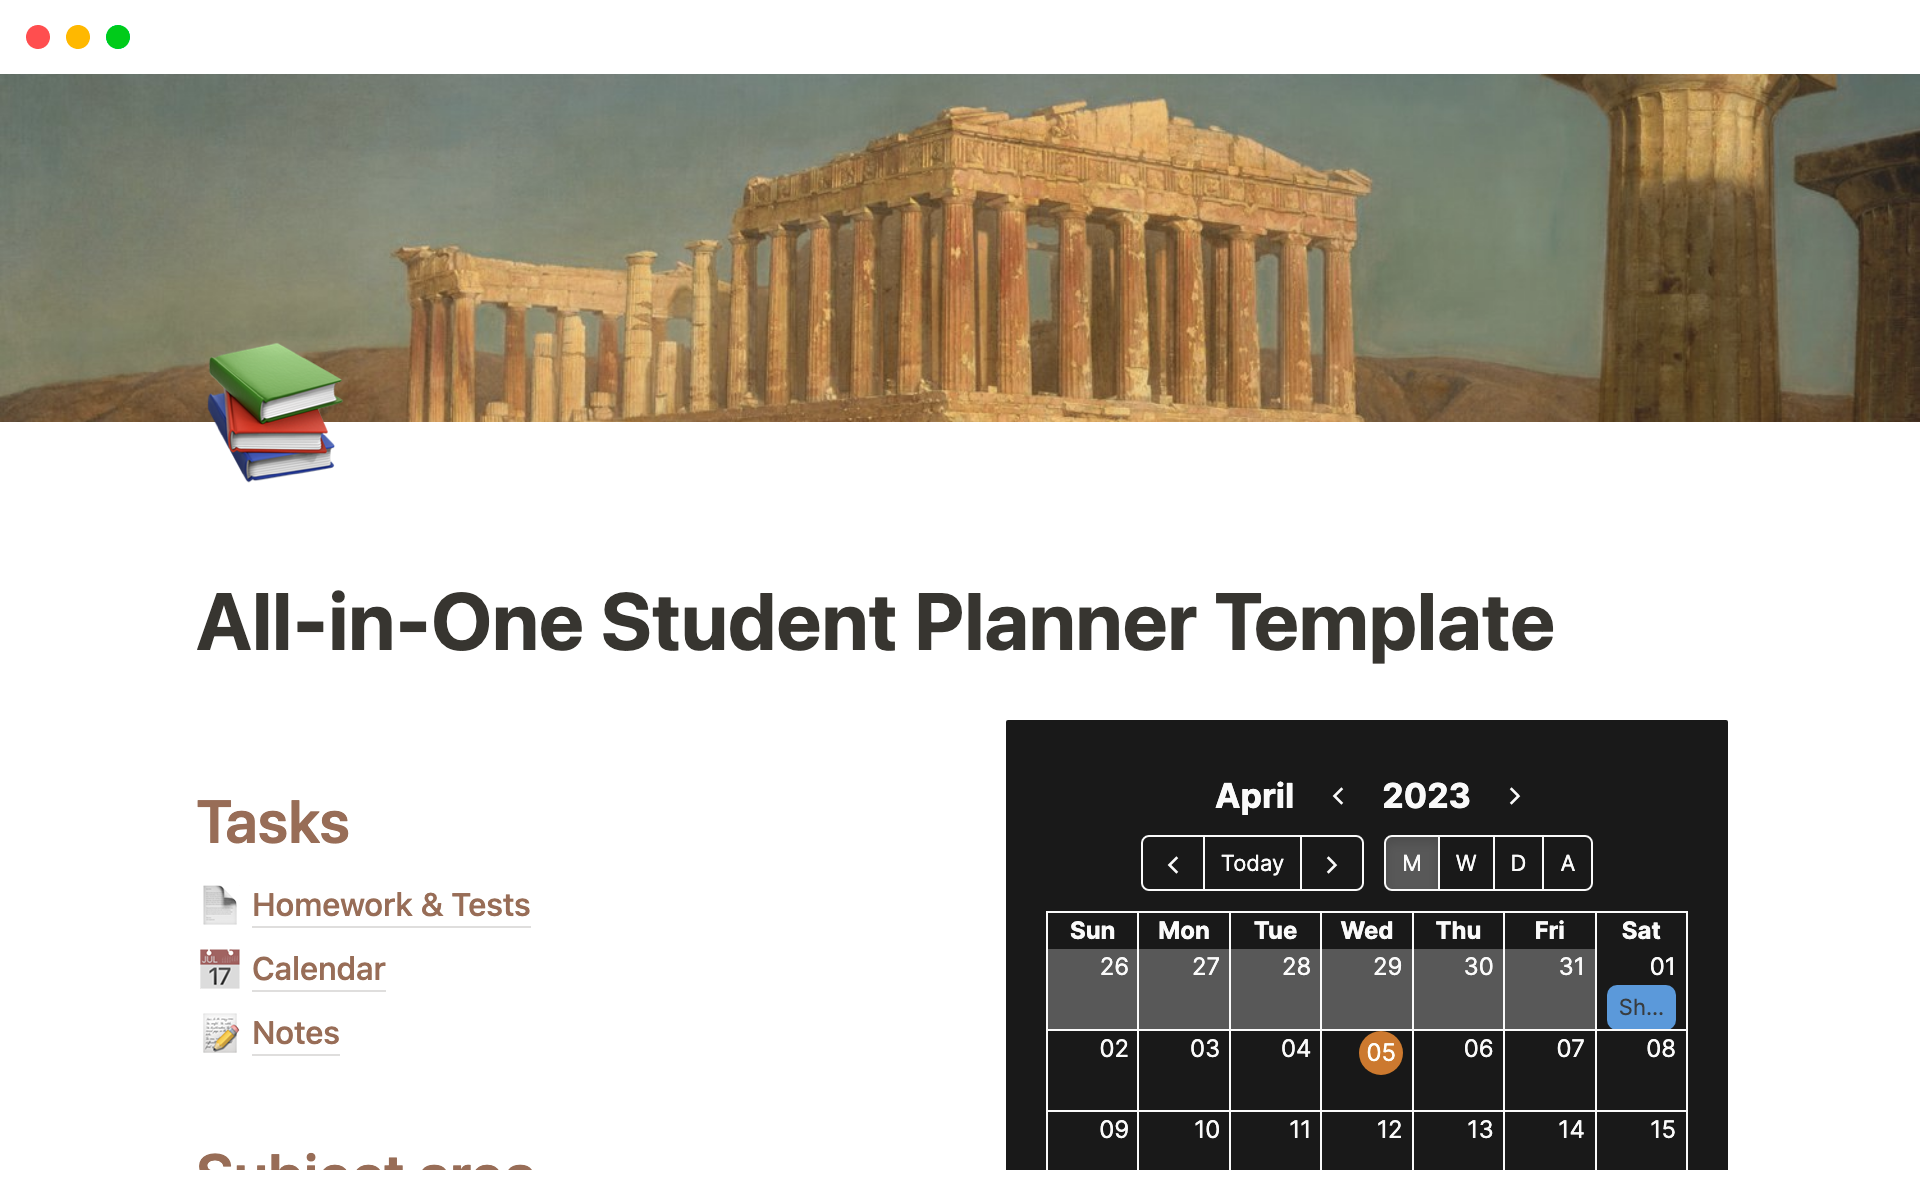 All-in-One Student Planner Templateのテンプレートのプレビュー